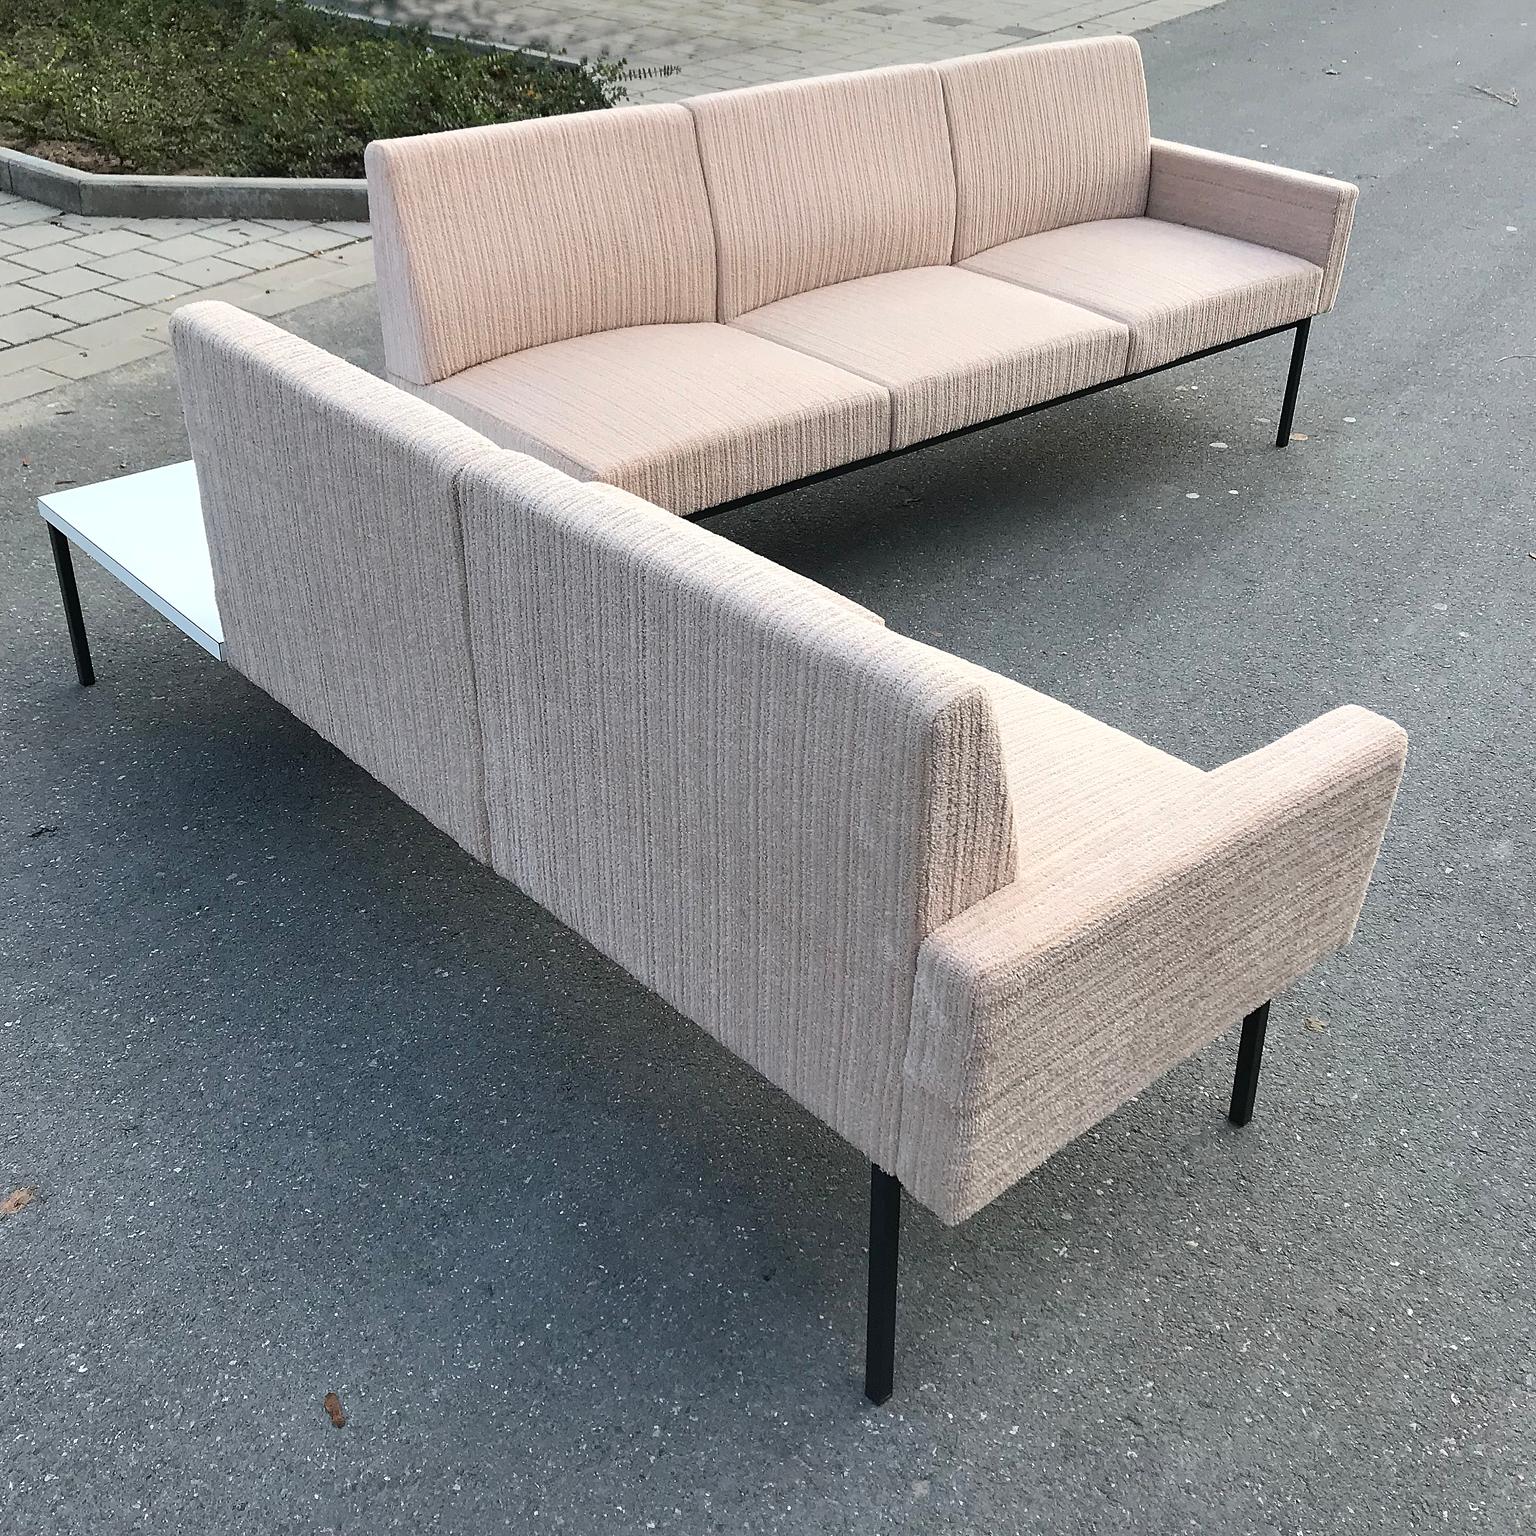 Modular Seating Group from Thonet, 1960s, Seating Elements, Lobby Sofa Beige  (Mitte des 20. Jahrhunderts)